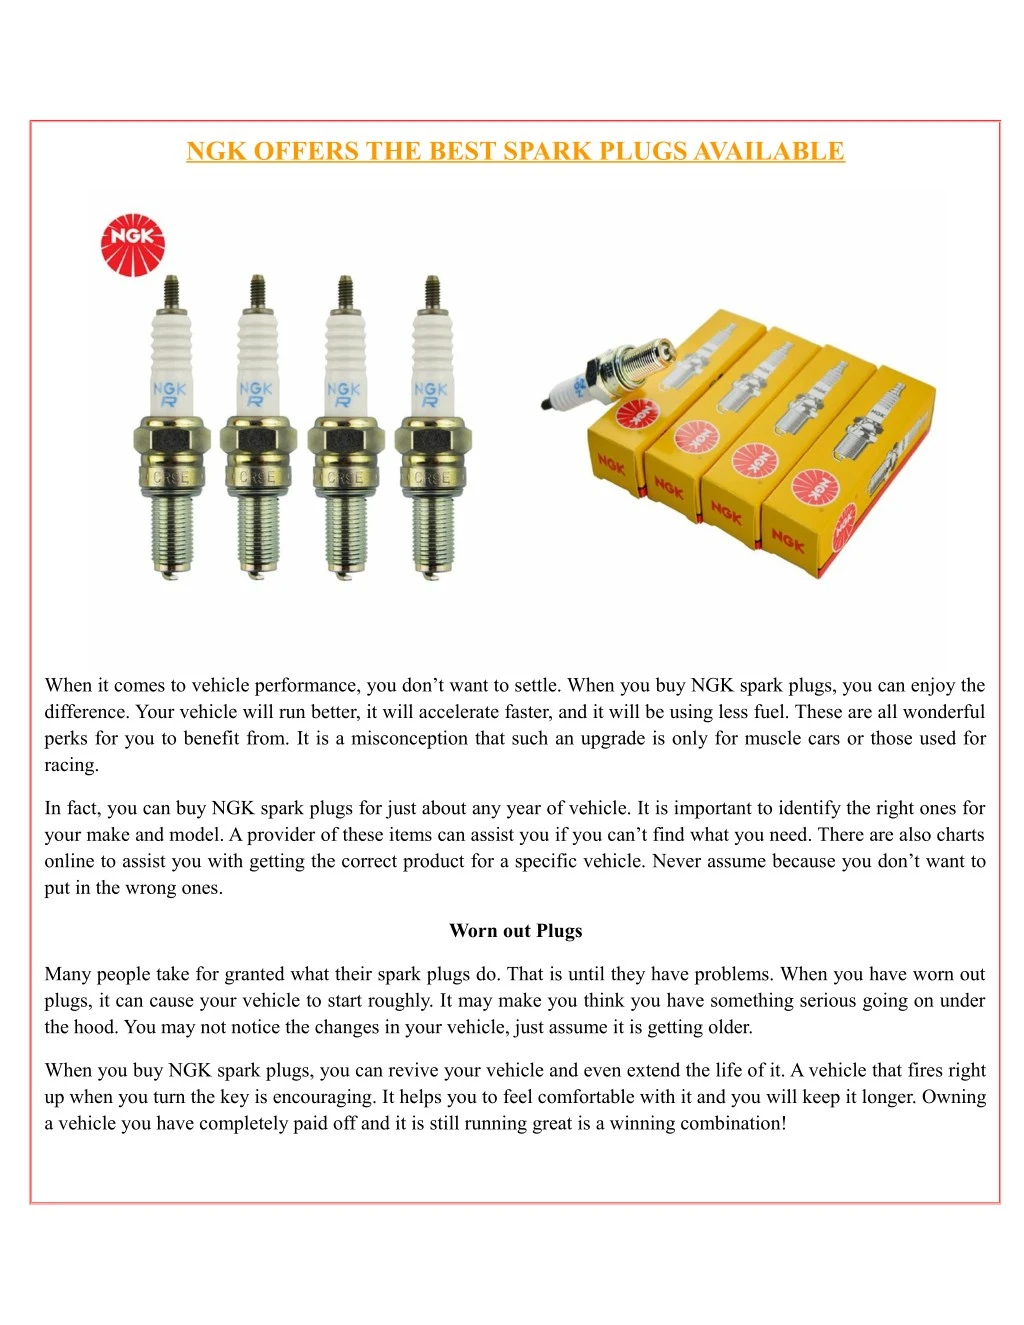 ngk offers the best spark plugs available